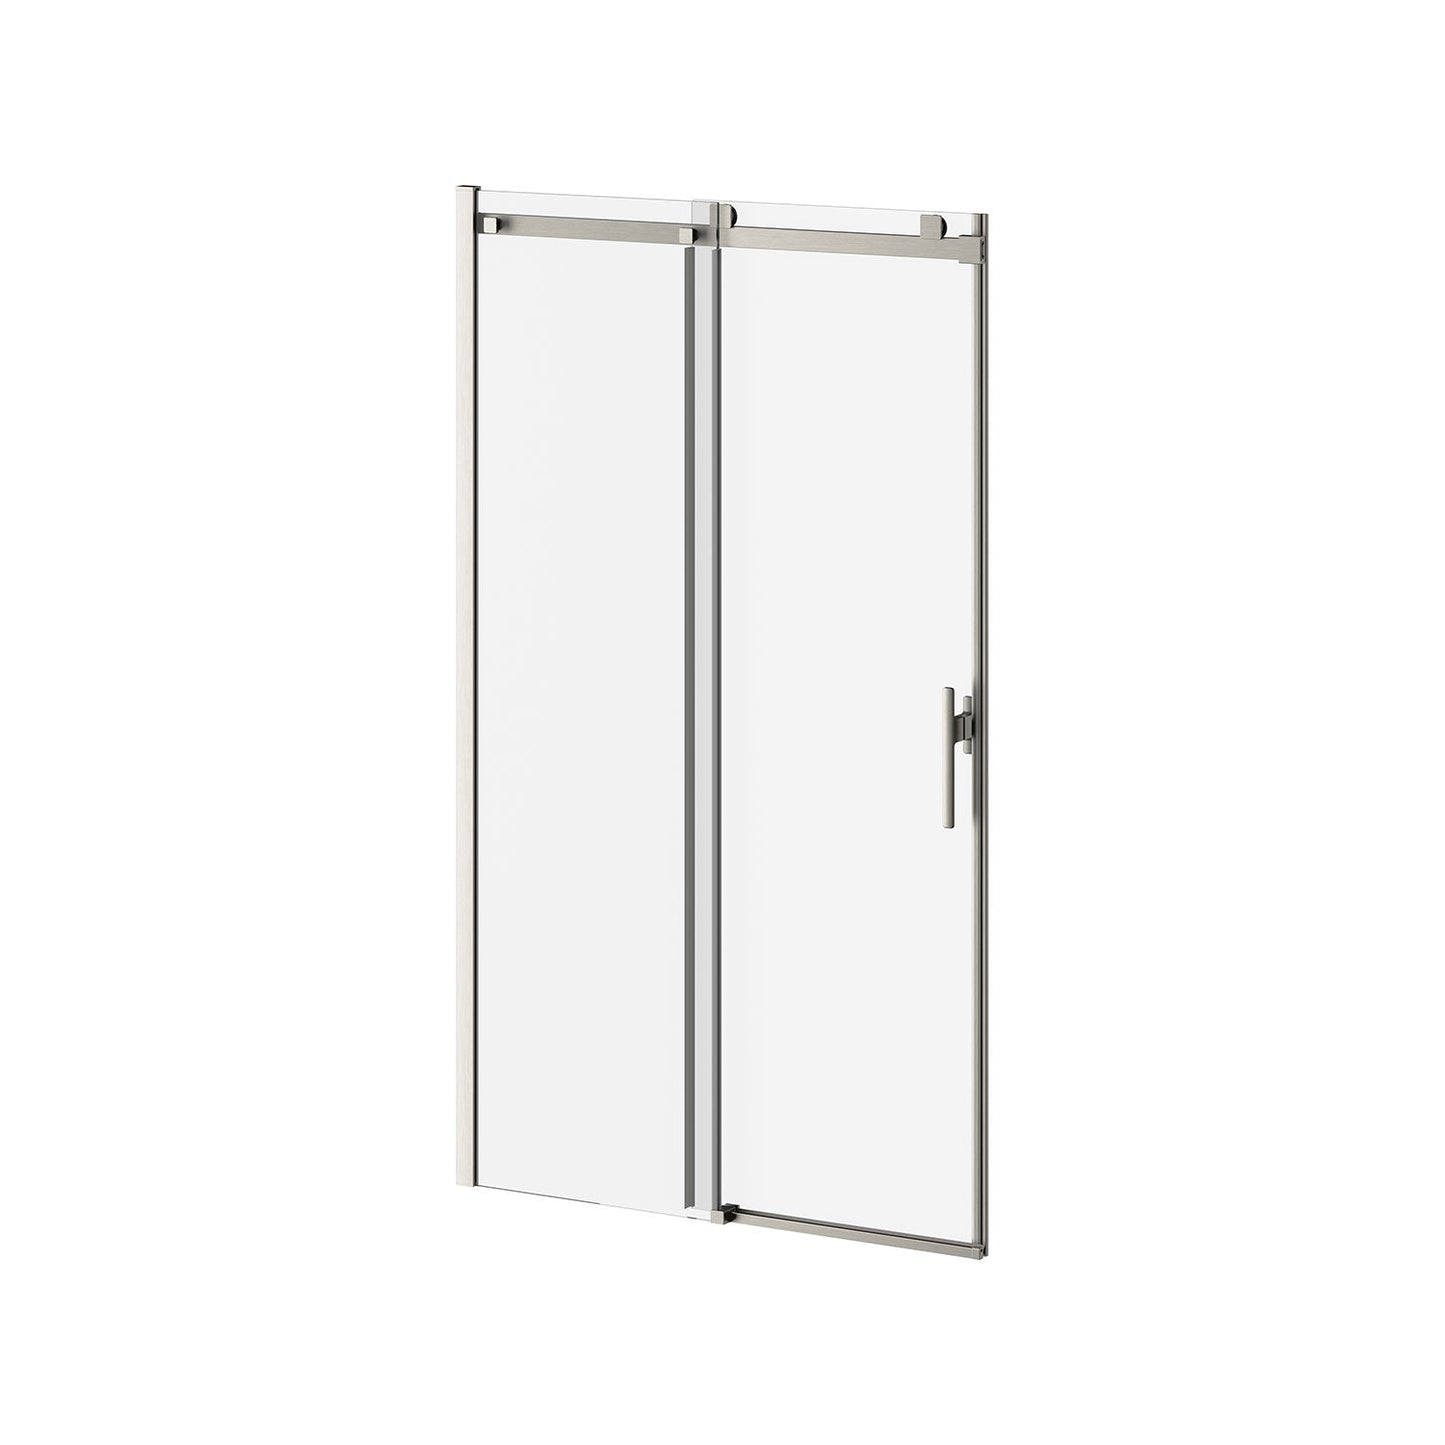 Kalia KONCEPT EVO 48" x 77" Sliding Shower Door Duraclean Glass with Fixed Panel and Mobile Panel for Alcove Installation (Reversible) Brushed Nickel